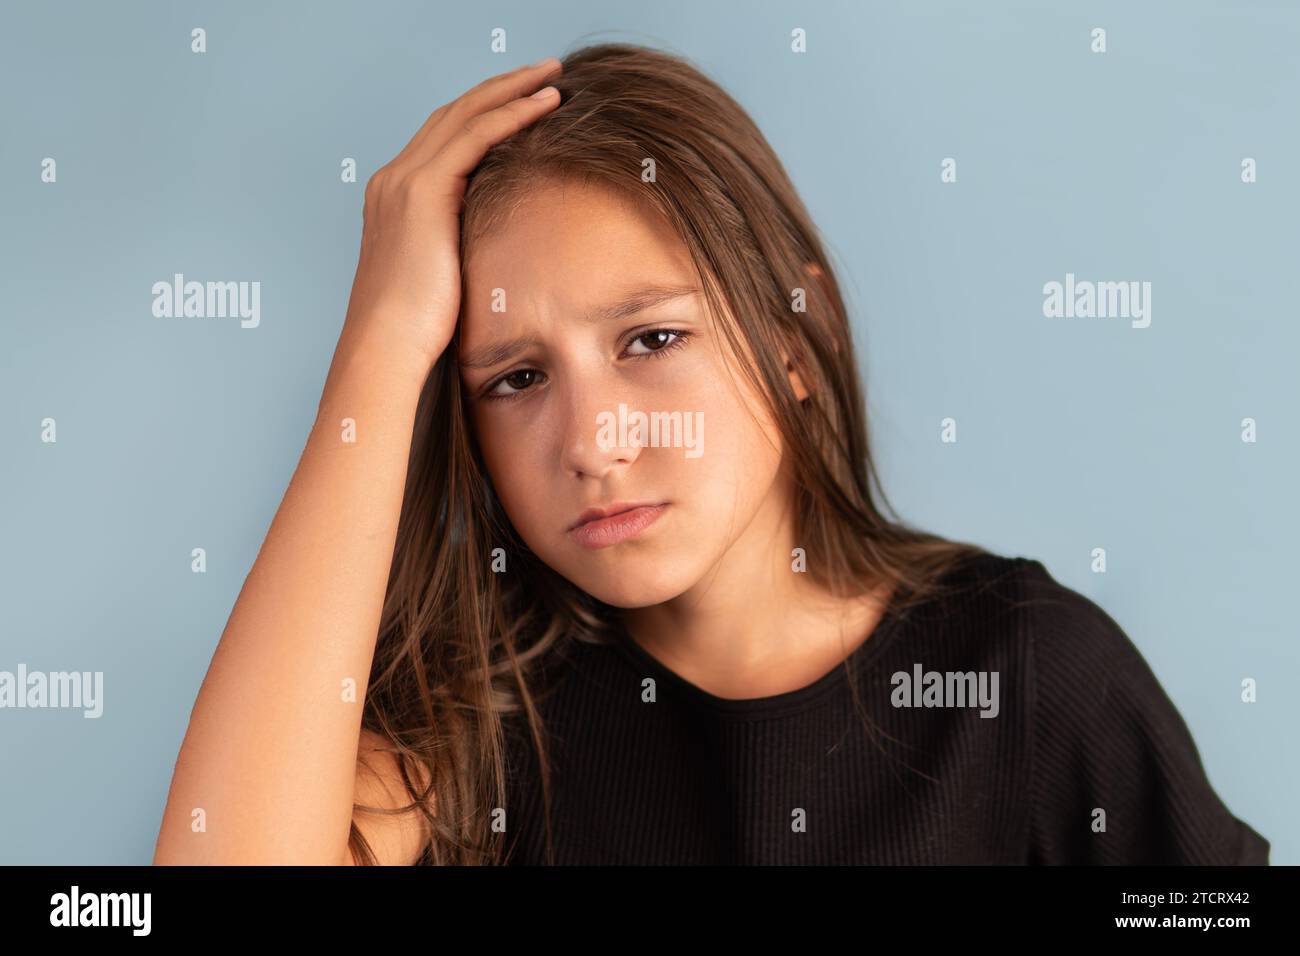 Little tired exhausted kid teen girl of 10-12 years old in black T-shirt put hand on forehead. look camera on pastel plain light blue background.. Stock Photo